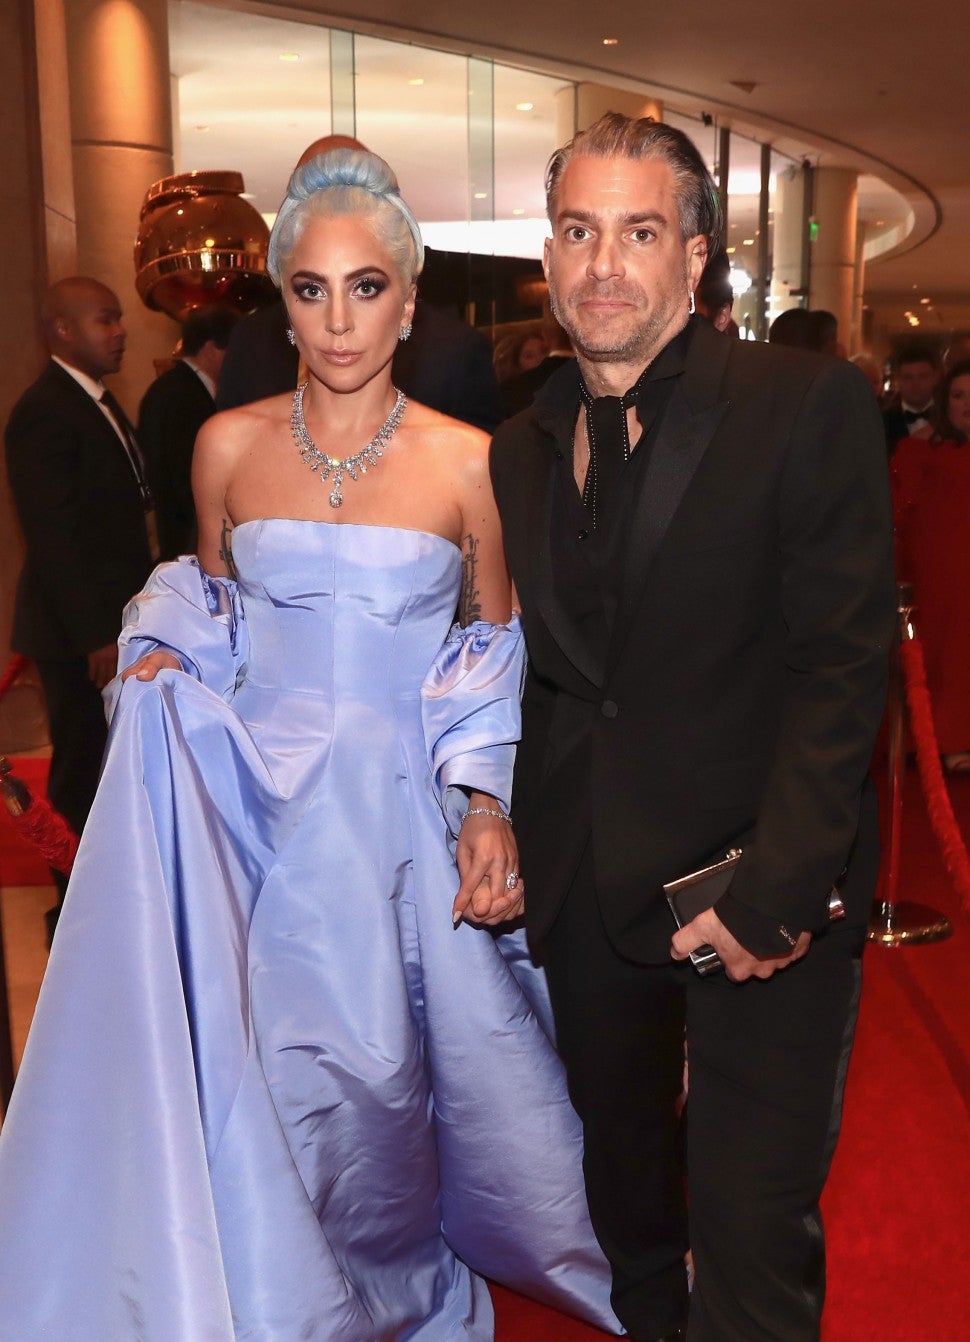 Lady Gaga and Christian Carino arrive to the 76th Annual Golden Globe Awards held at the Beverly Hilton Hotel on January 6, 2019.